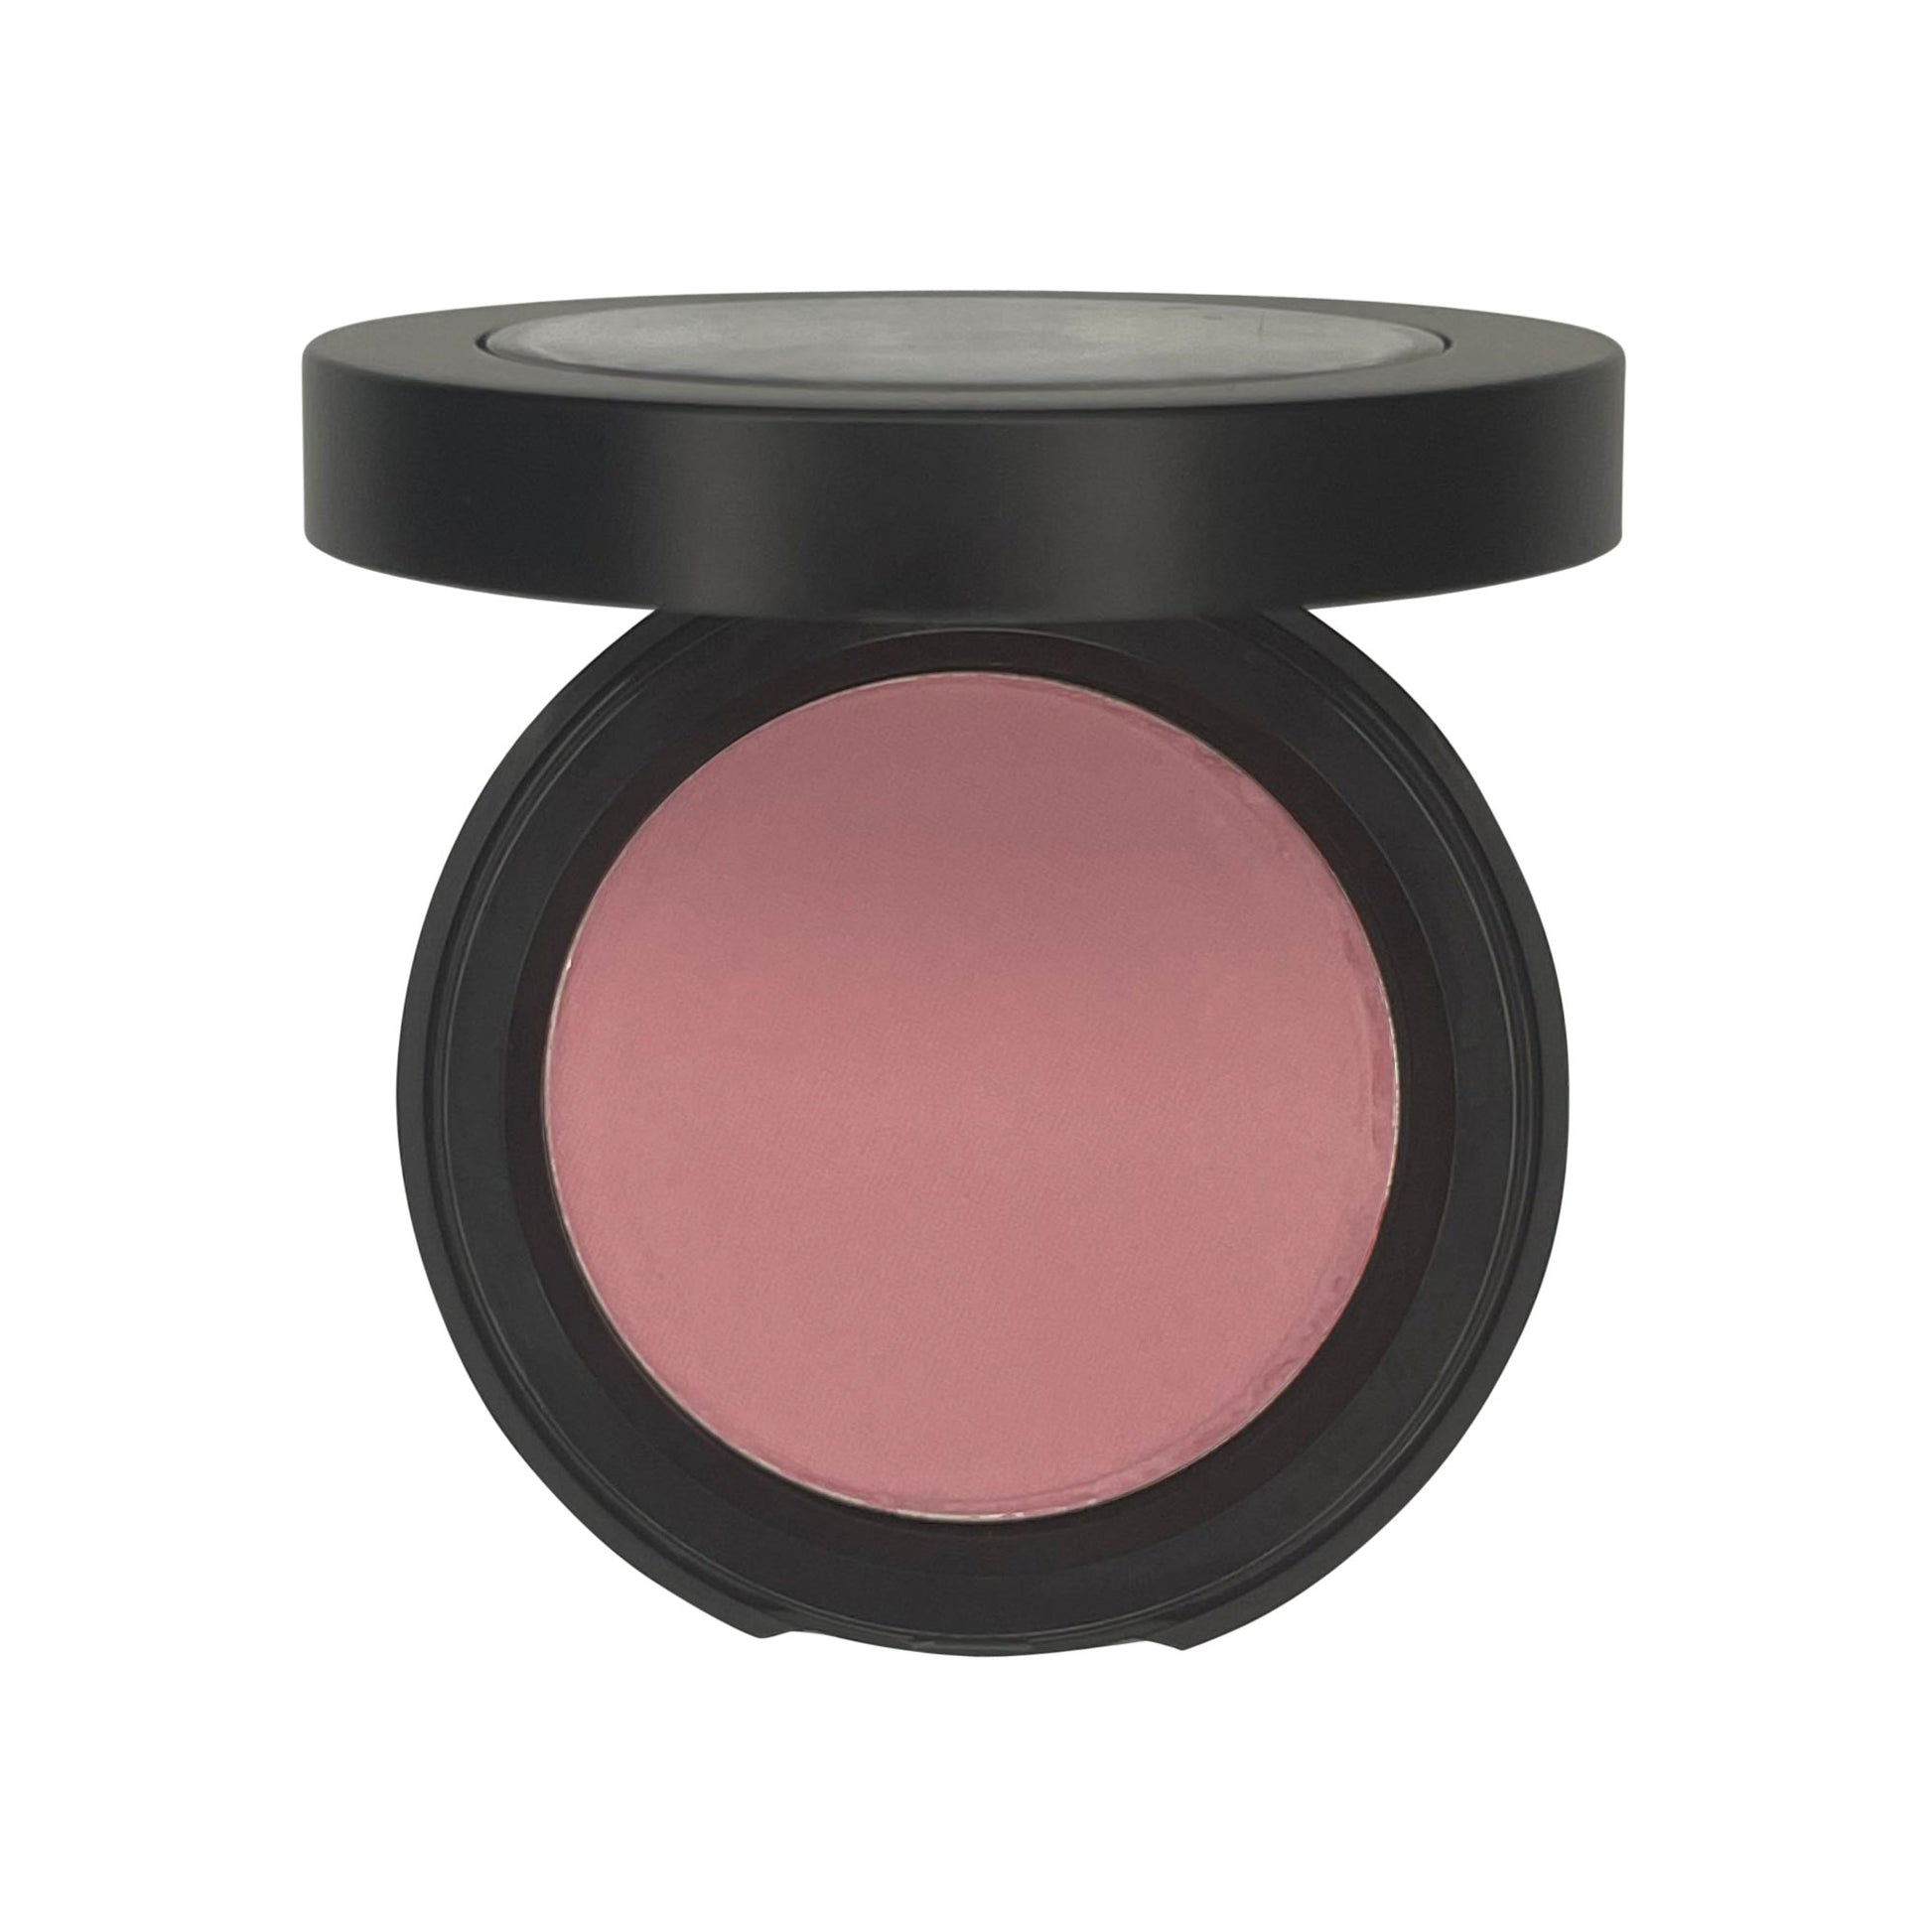 Elevate your cheek color with ease using Magnolia Single Pan Blush by Cruisin Organics. This talc-free powder is expertly triple-milled for a seamless, luxurious application and a long-lasting, natural flush. Enjoy a radiant and healthy complexion on the go with clean ingredients.